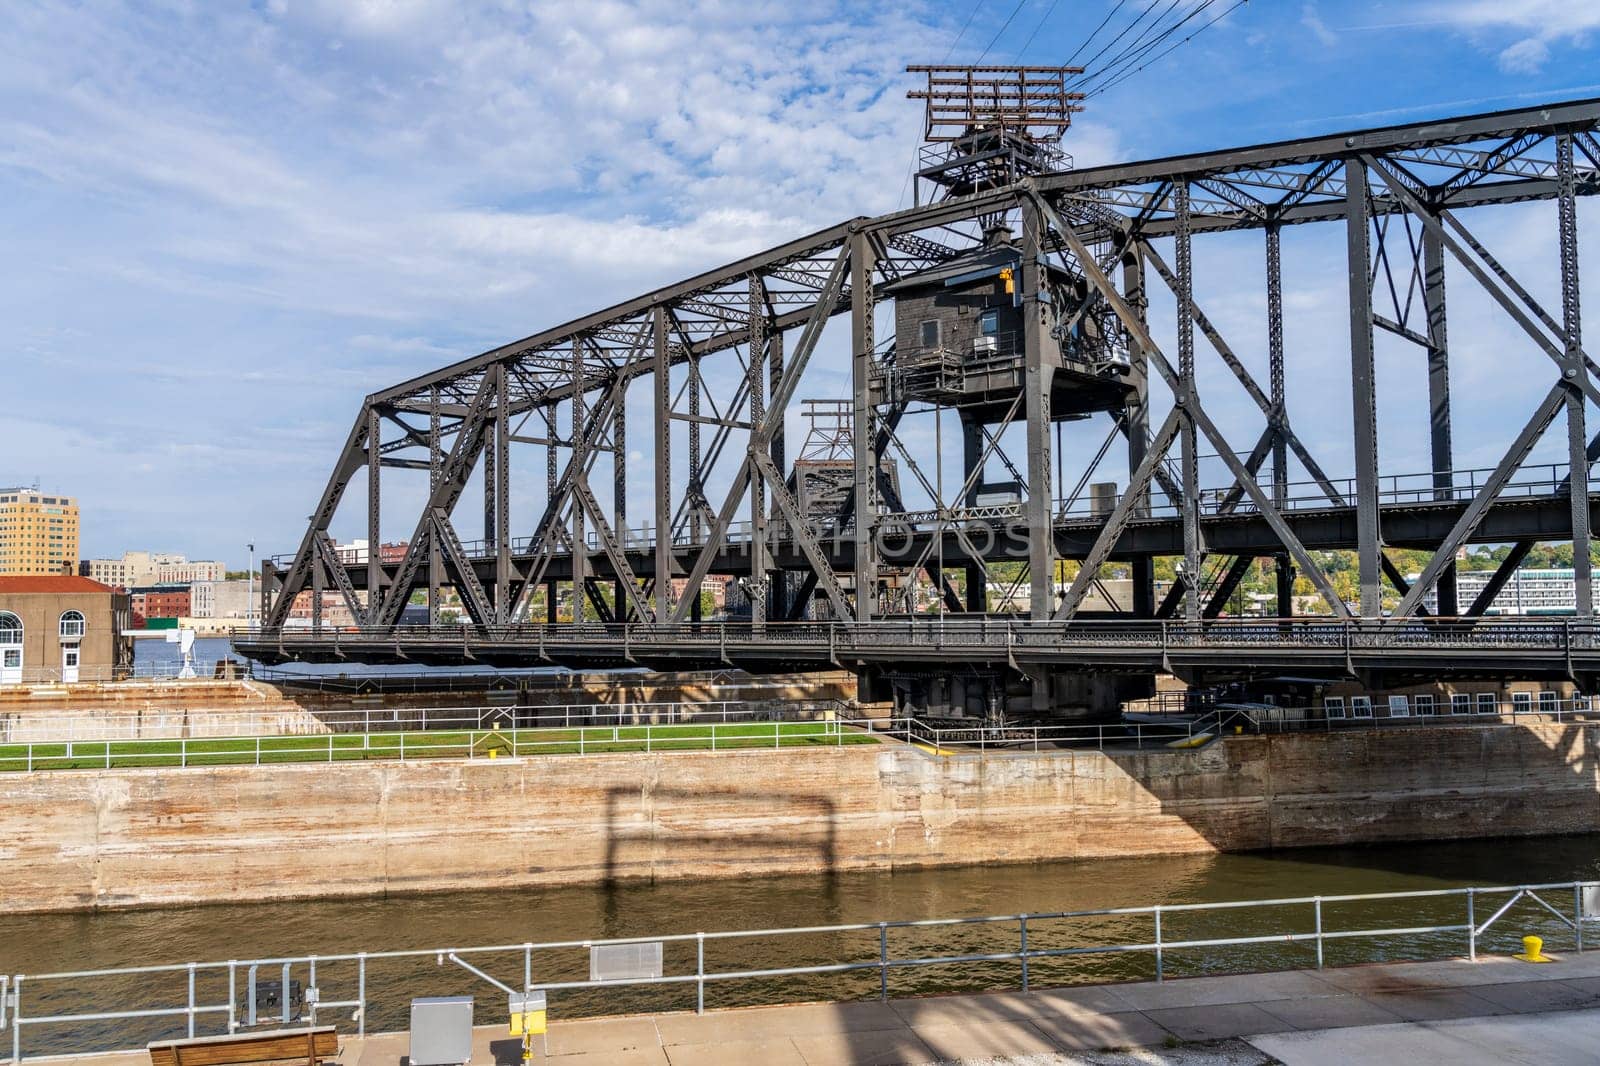 Historic swing span of the Arsenal or Government bridge swings open over the Lock and Dam No. 15 in Davenport, Iowa